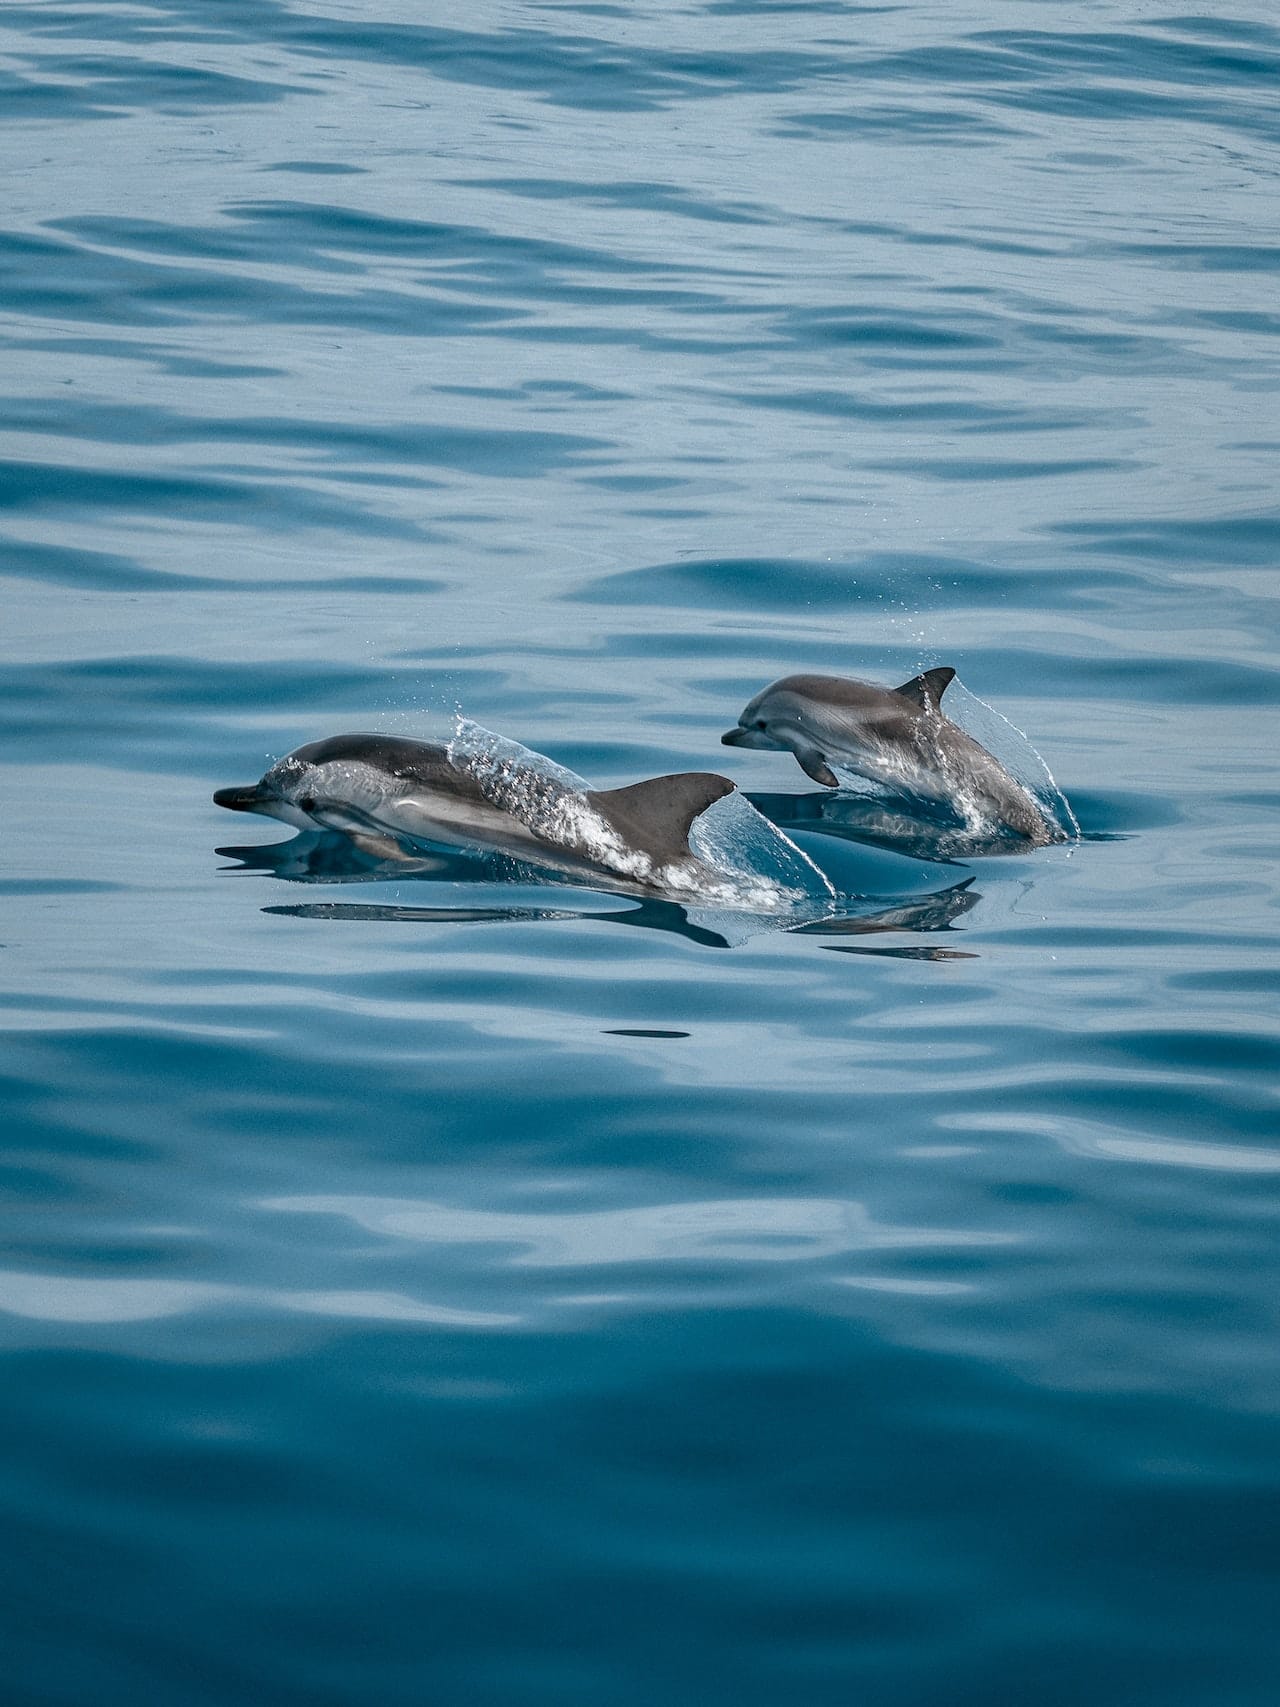 Two dolphins, an adult and a juvenile, playing in the ocean in Los Angeles, California.